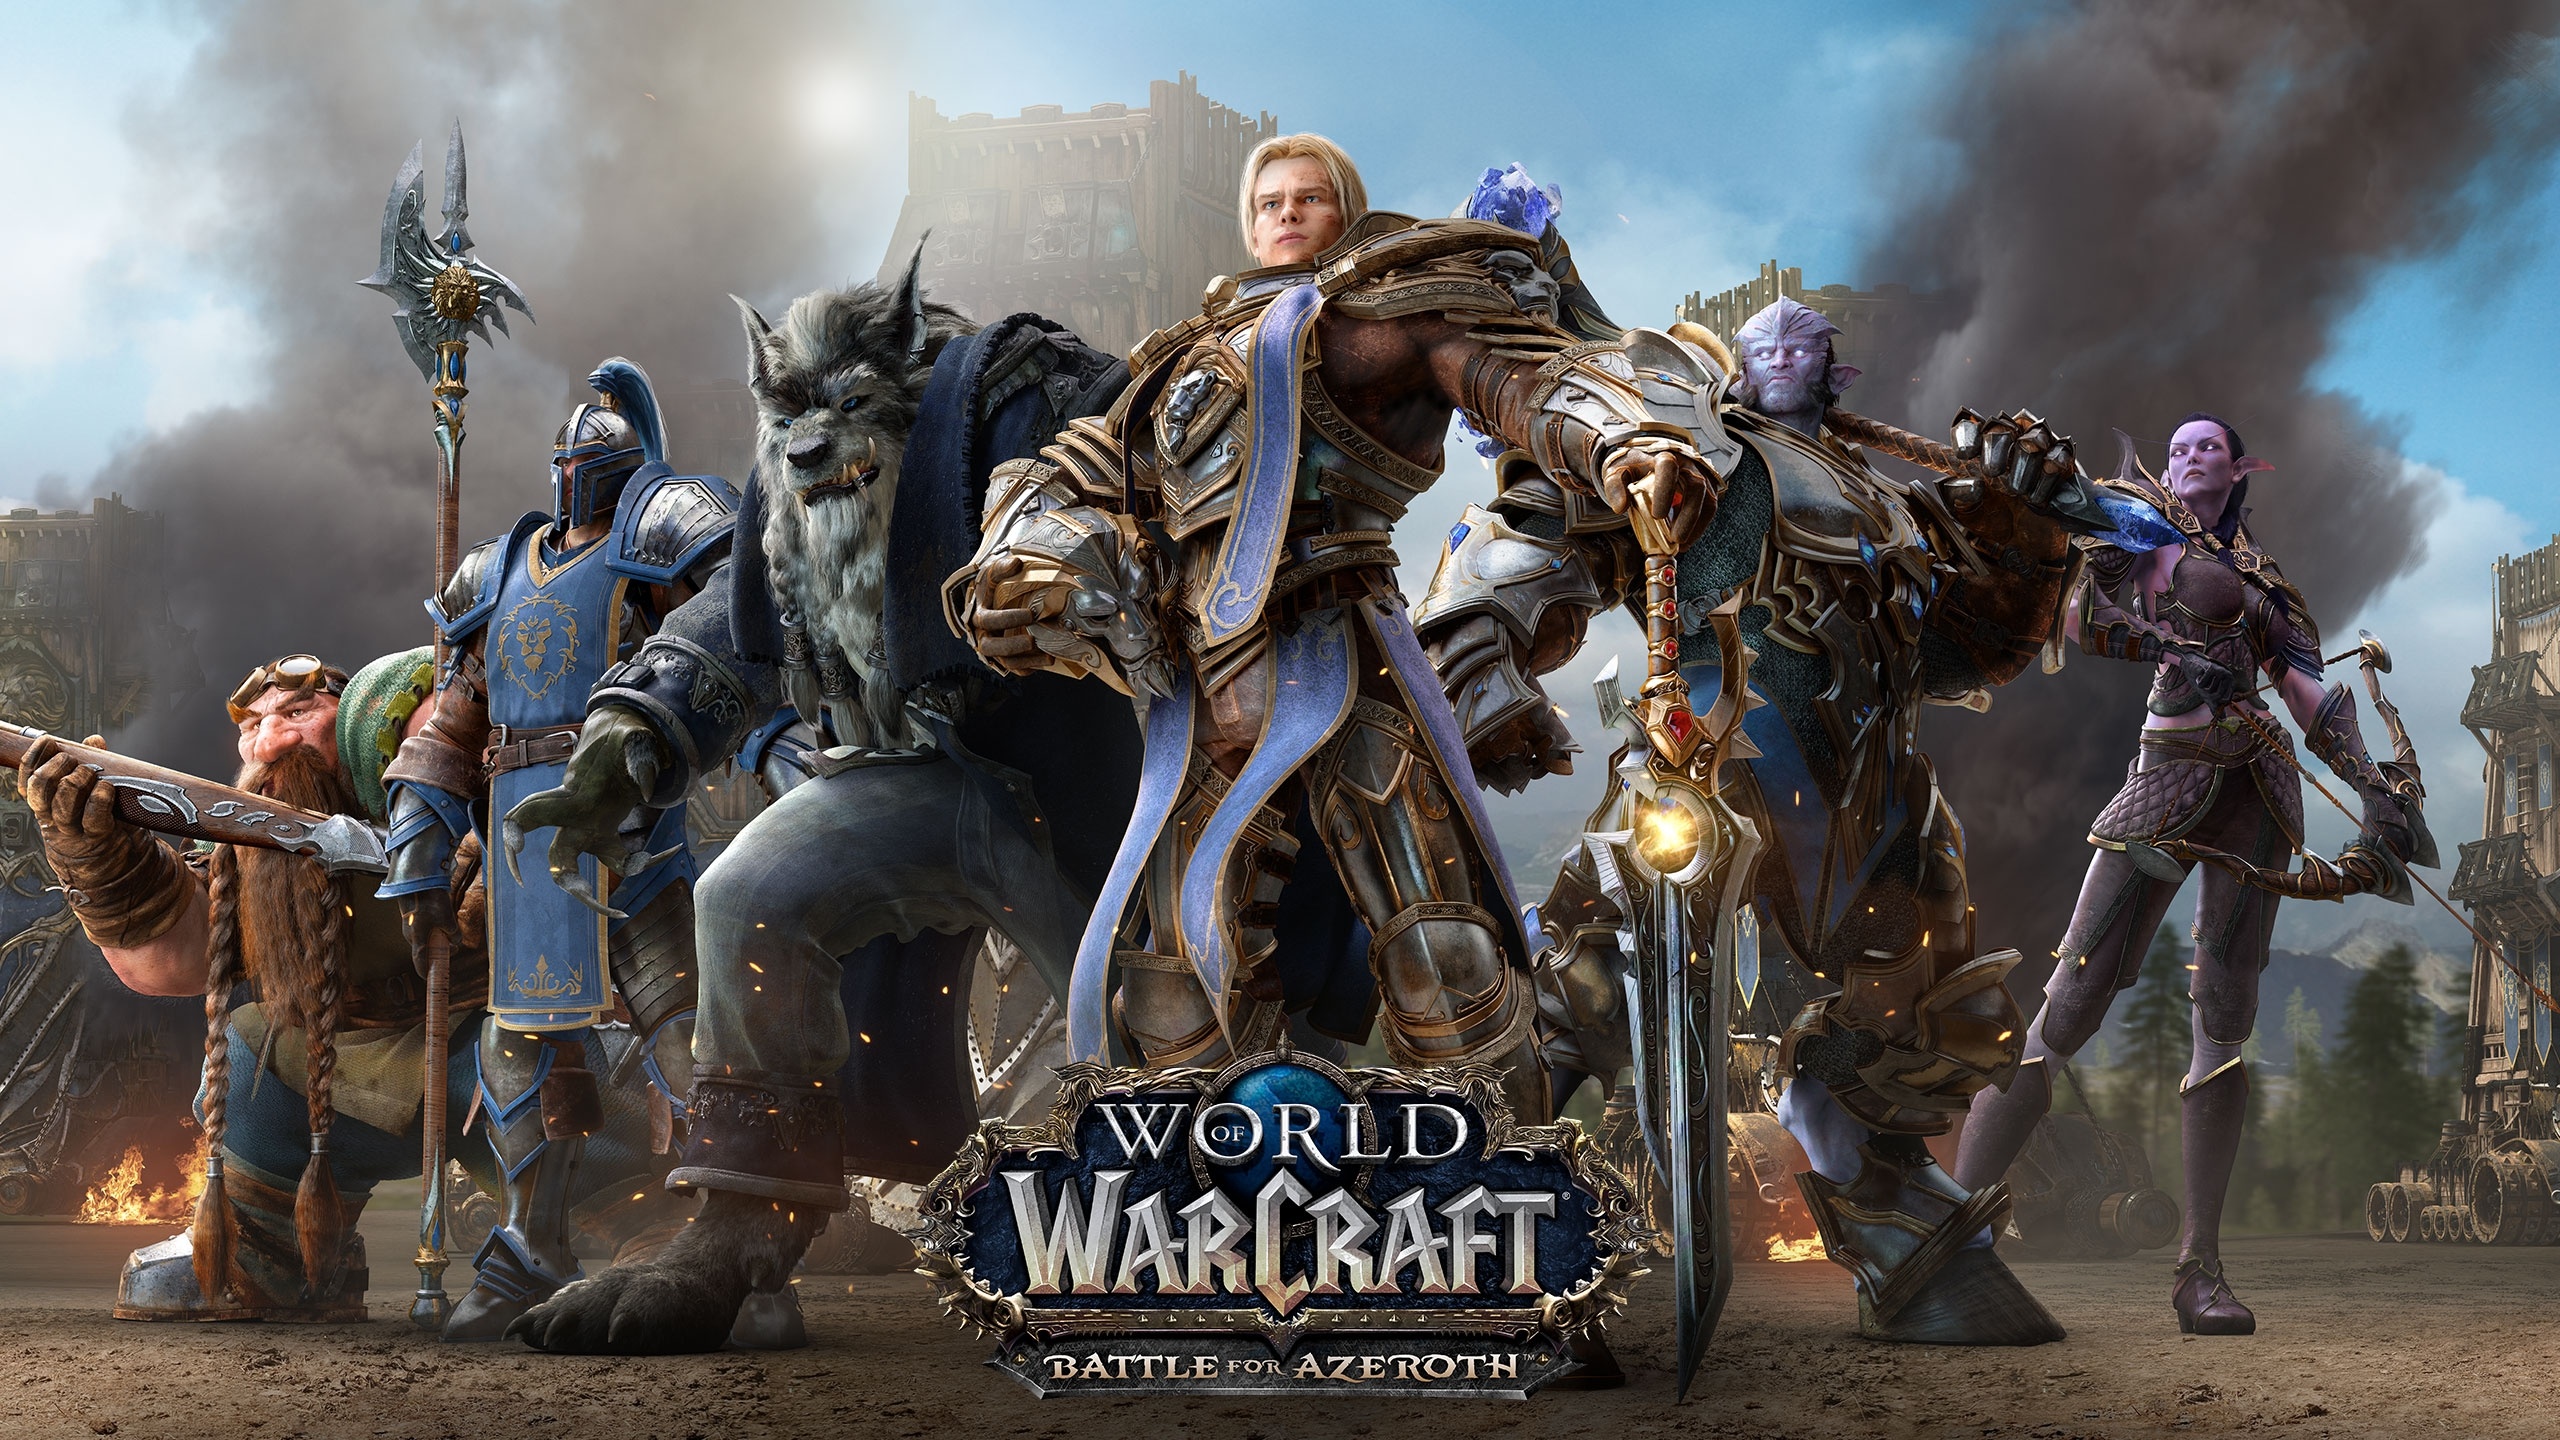 alliance (world of warcraft), video game, world of warcraft: battle for azeroth, anduin wrynn, world of warcraft